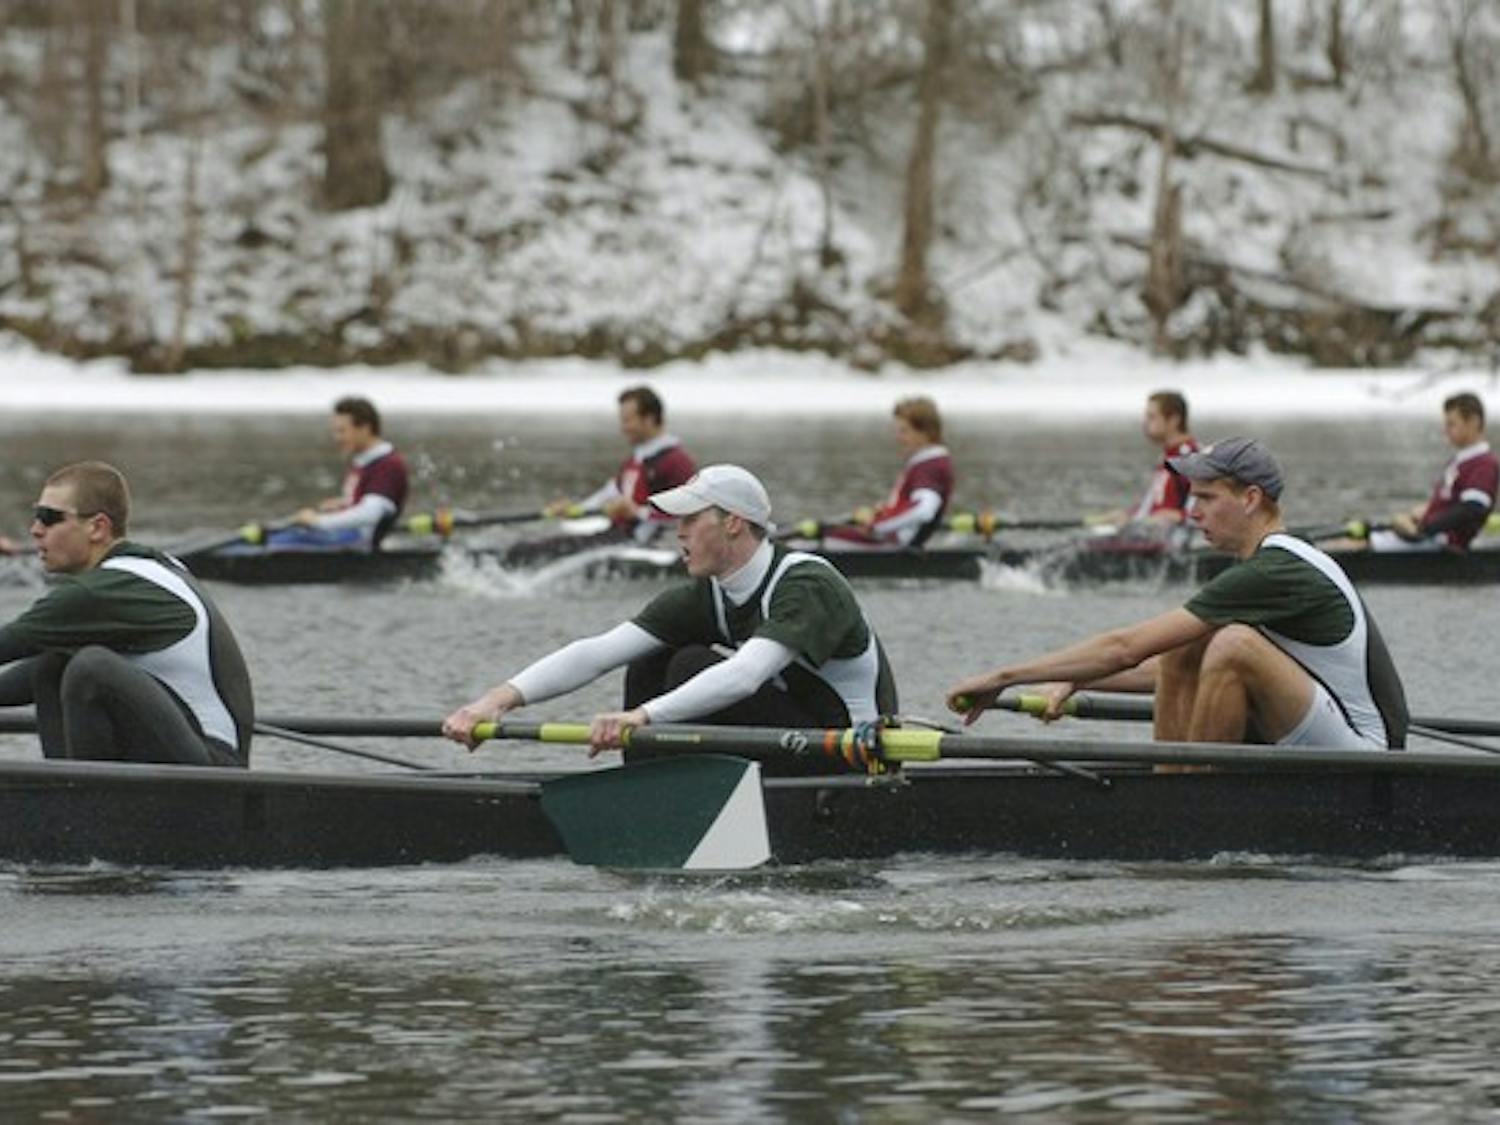 The Dartmouth varsity lightweight eight, the defending Eastern Sprints champion, dispatched Delaware by three seconds Saturday on Lake Quinsigamond in Worcester, Mass.